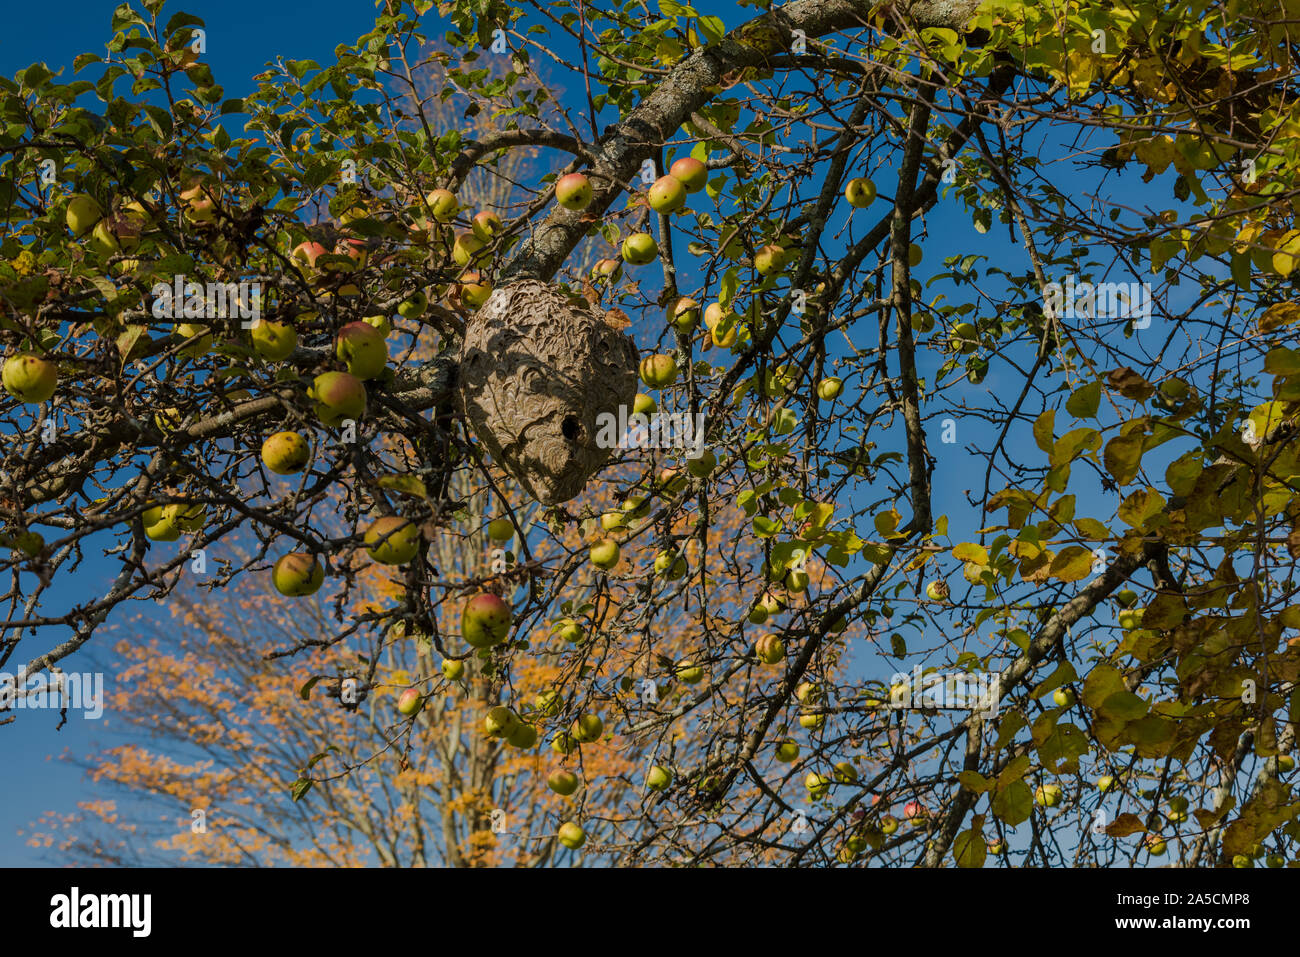 Large wild beehive in high branches of wild apple tree surrounded by ripe apples that no-one fares touch on Appalachian Trail, Ct, USA Stock Photo